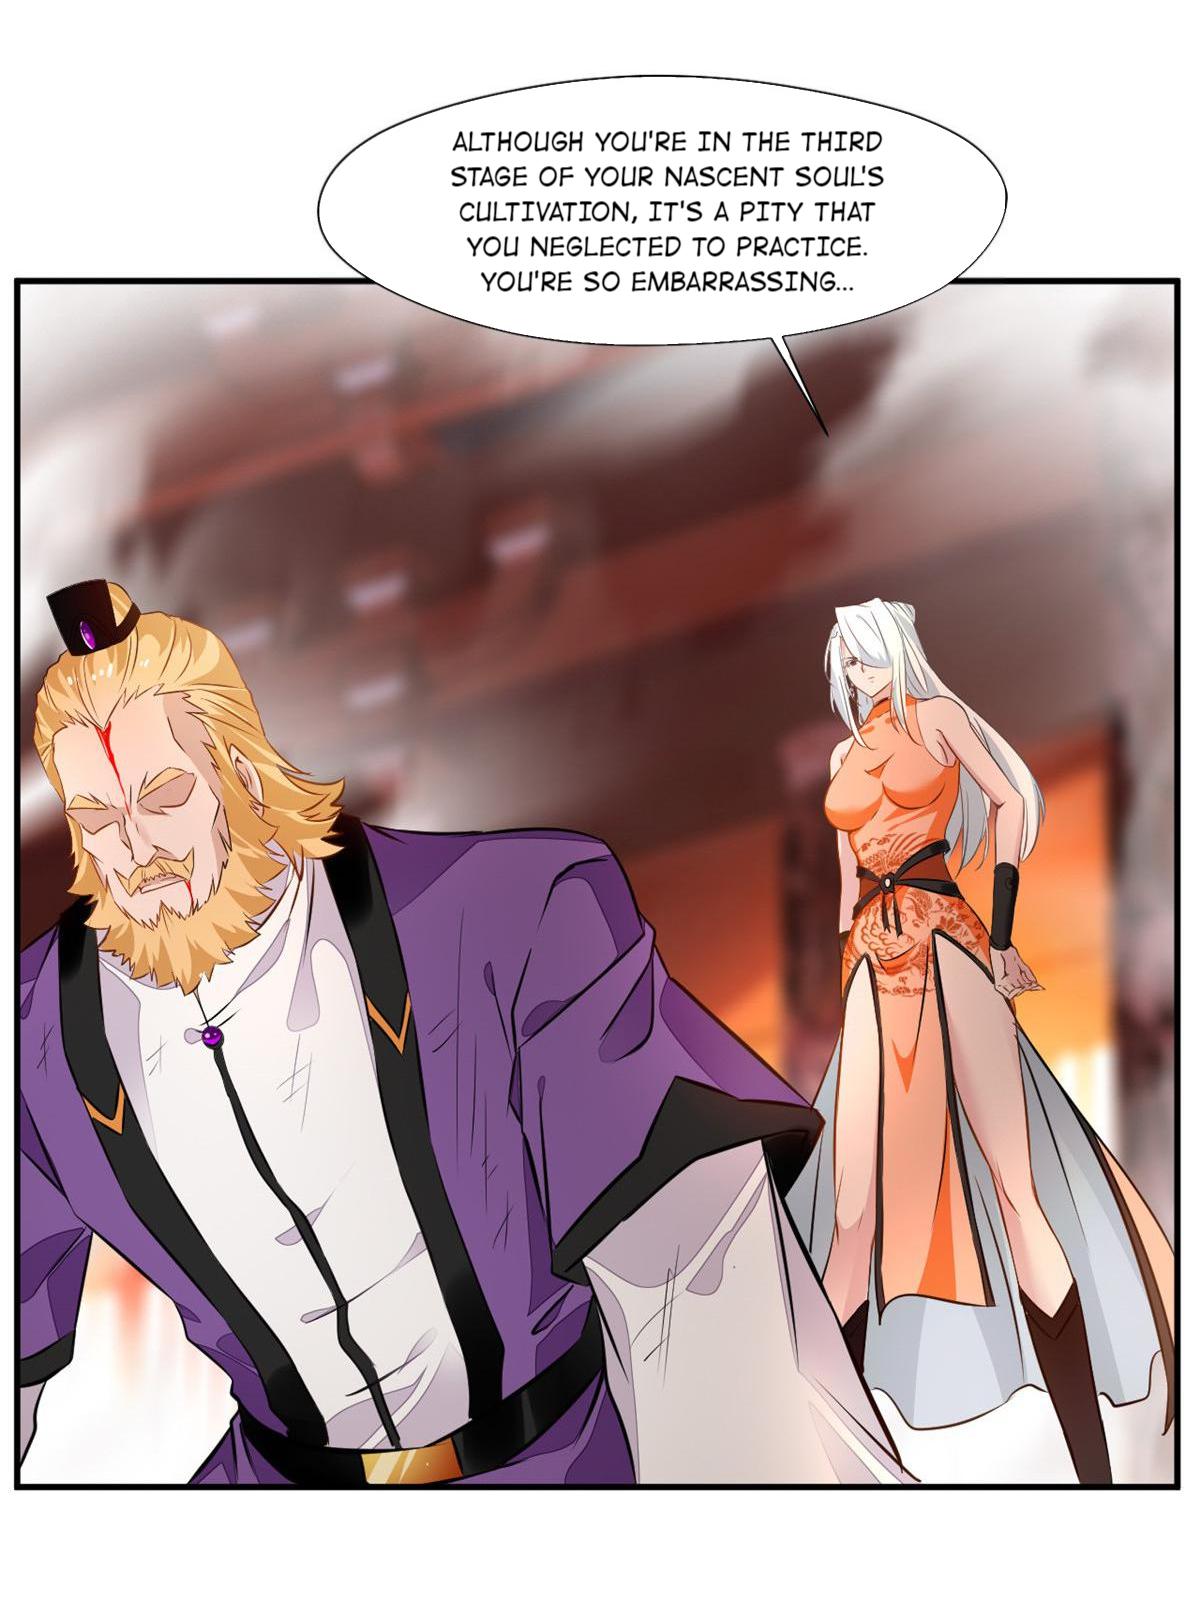 Peerless Ancient chapter 67 page 4